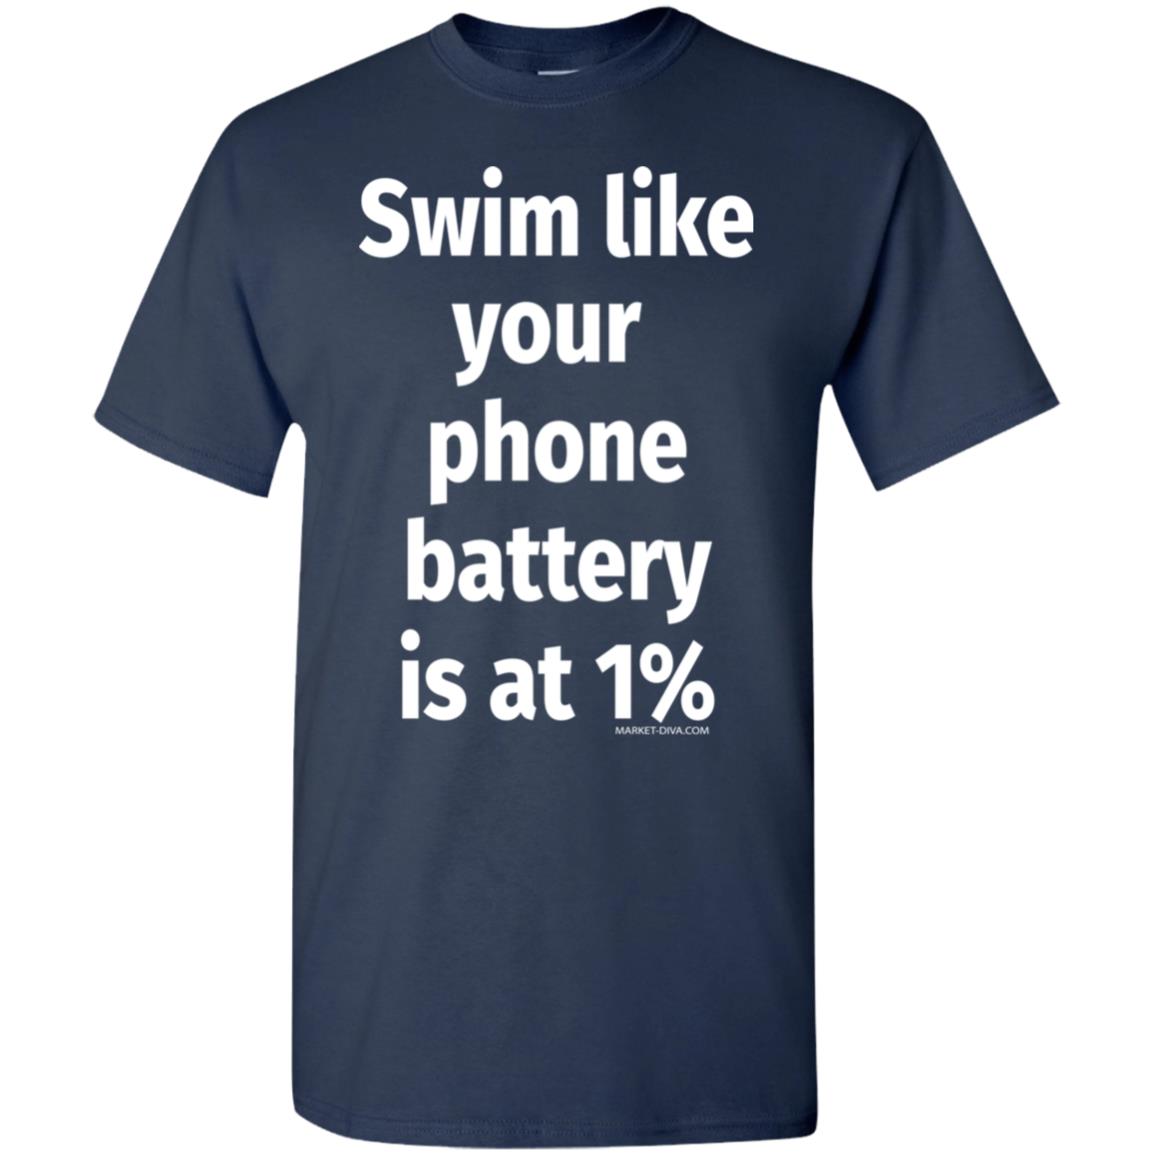 Swim Like Your Phone Battery is 1%